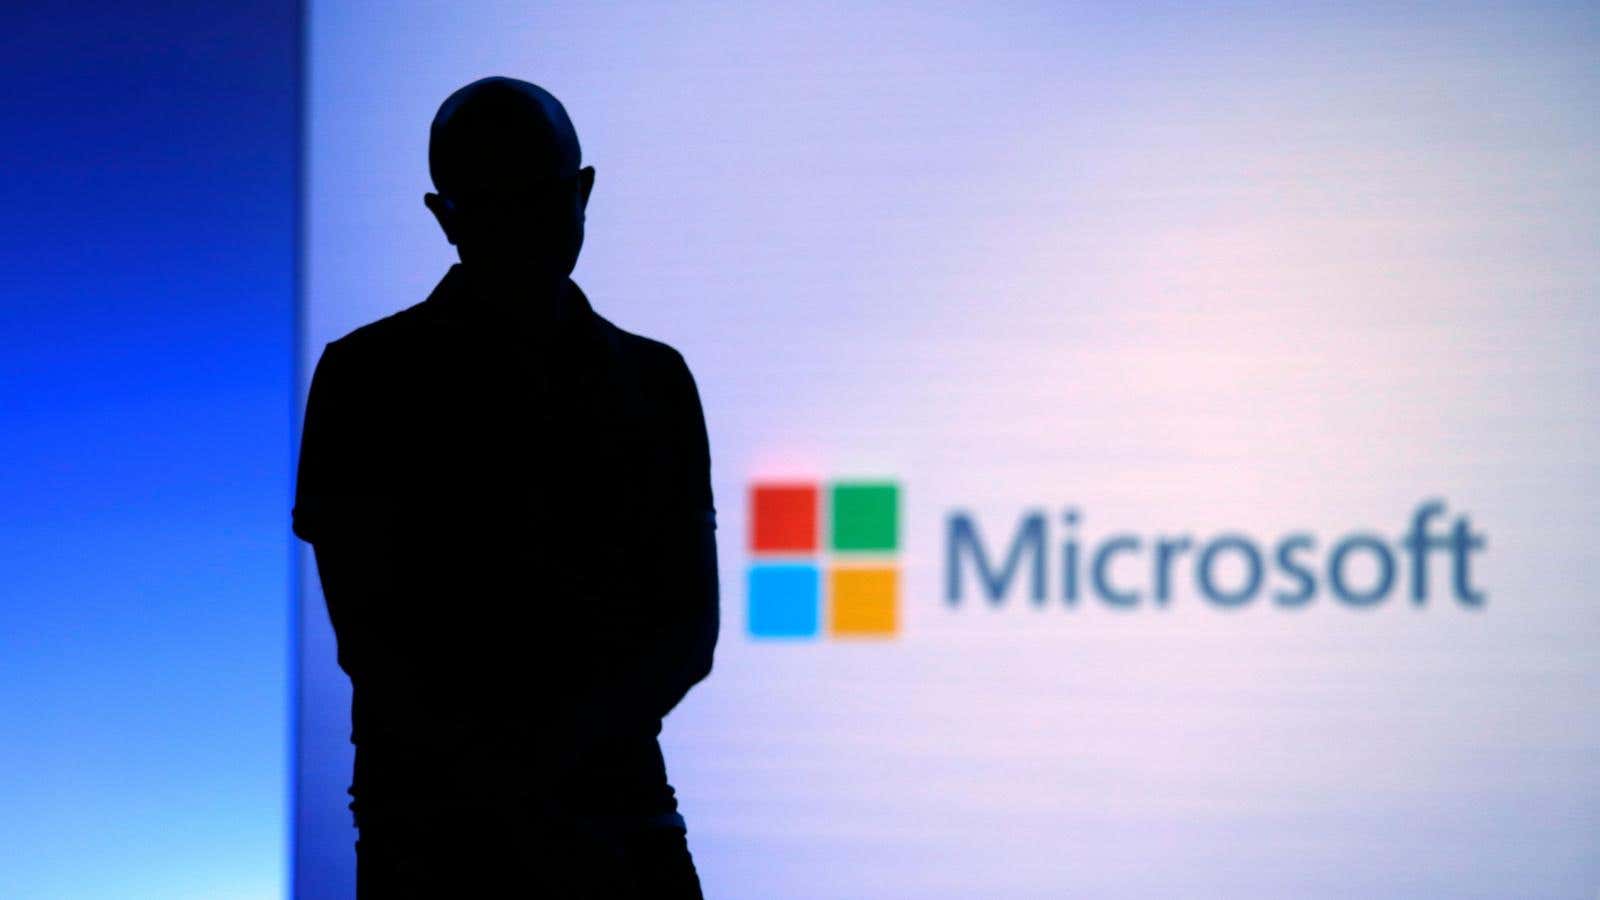 Microsoft warned investors that biased or flawed AI could hurt the company’s image